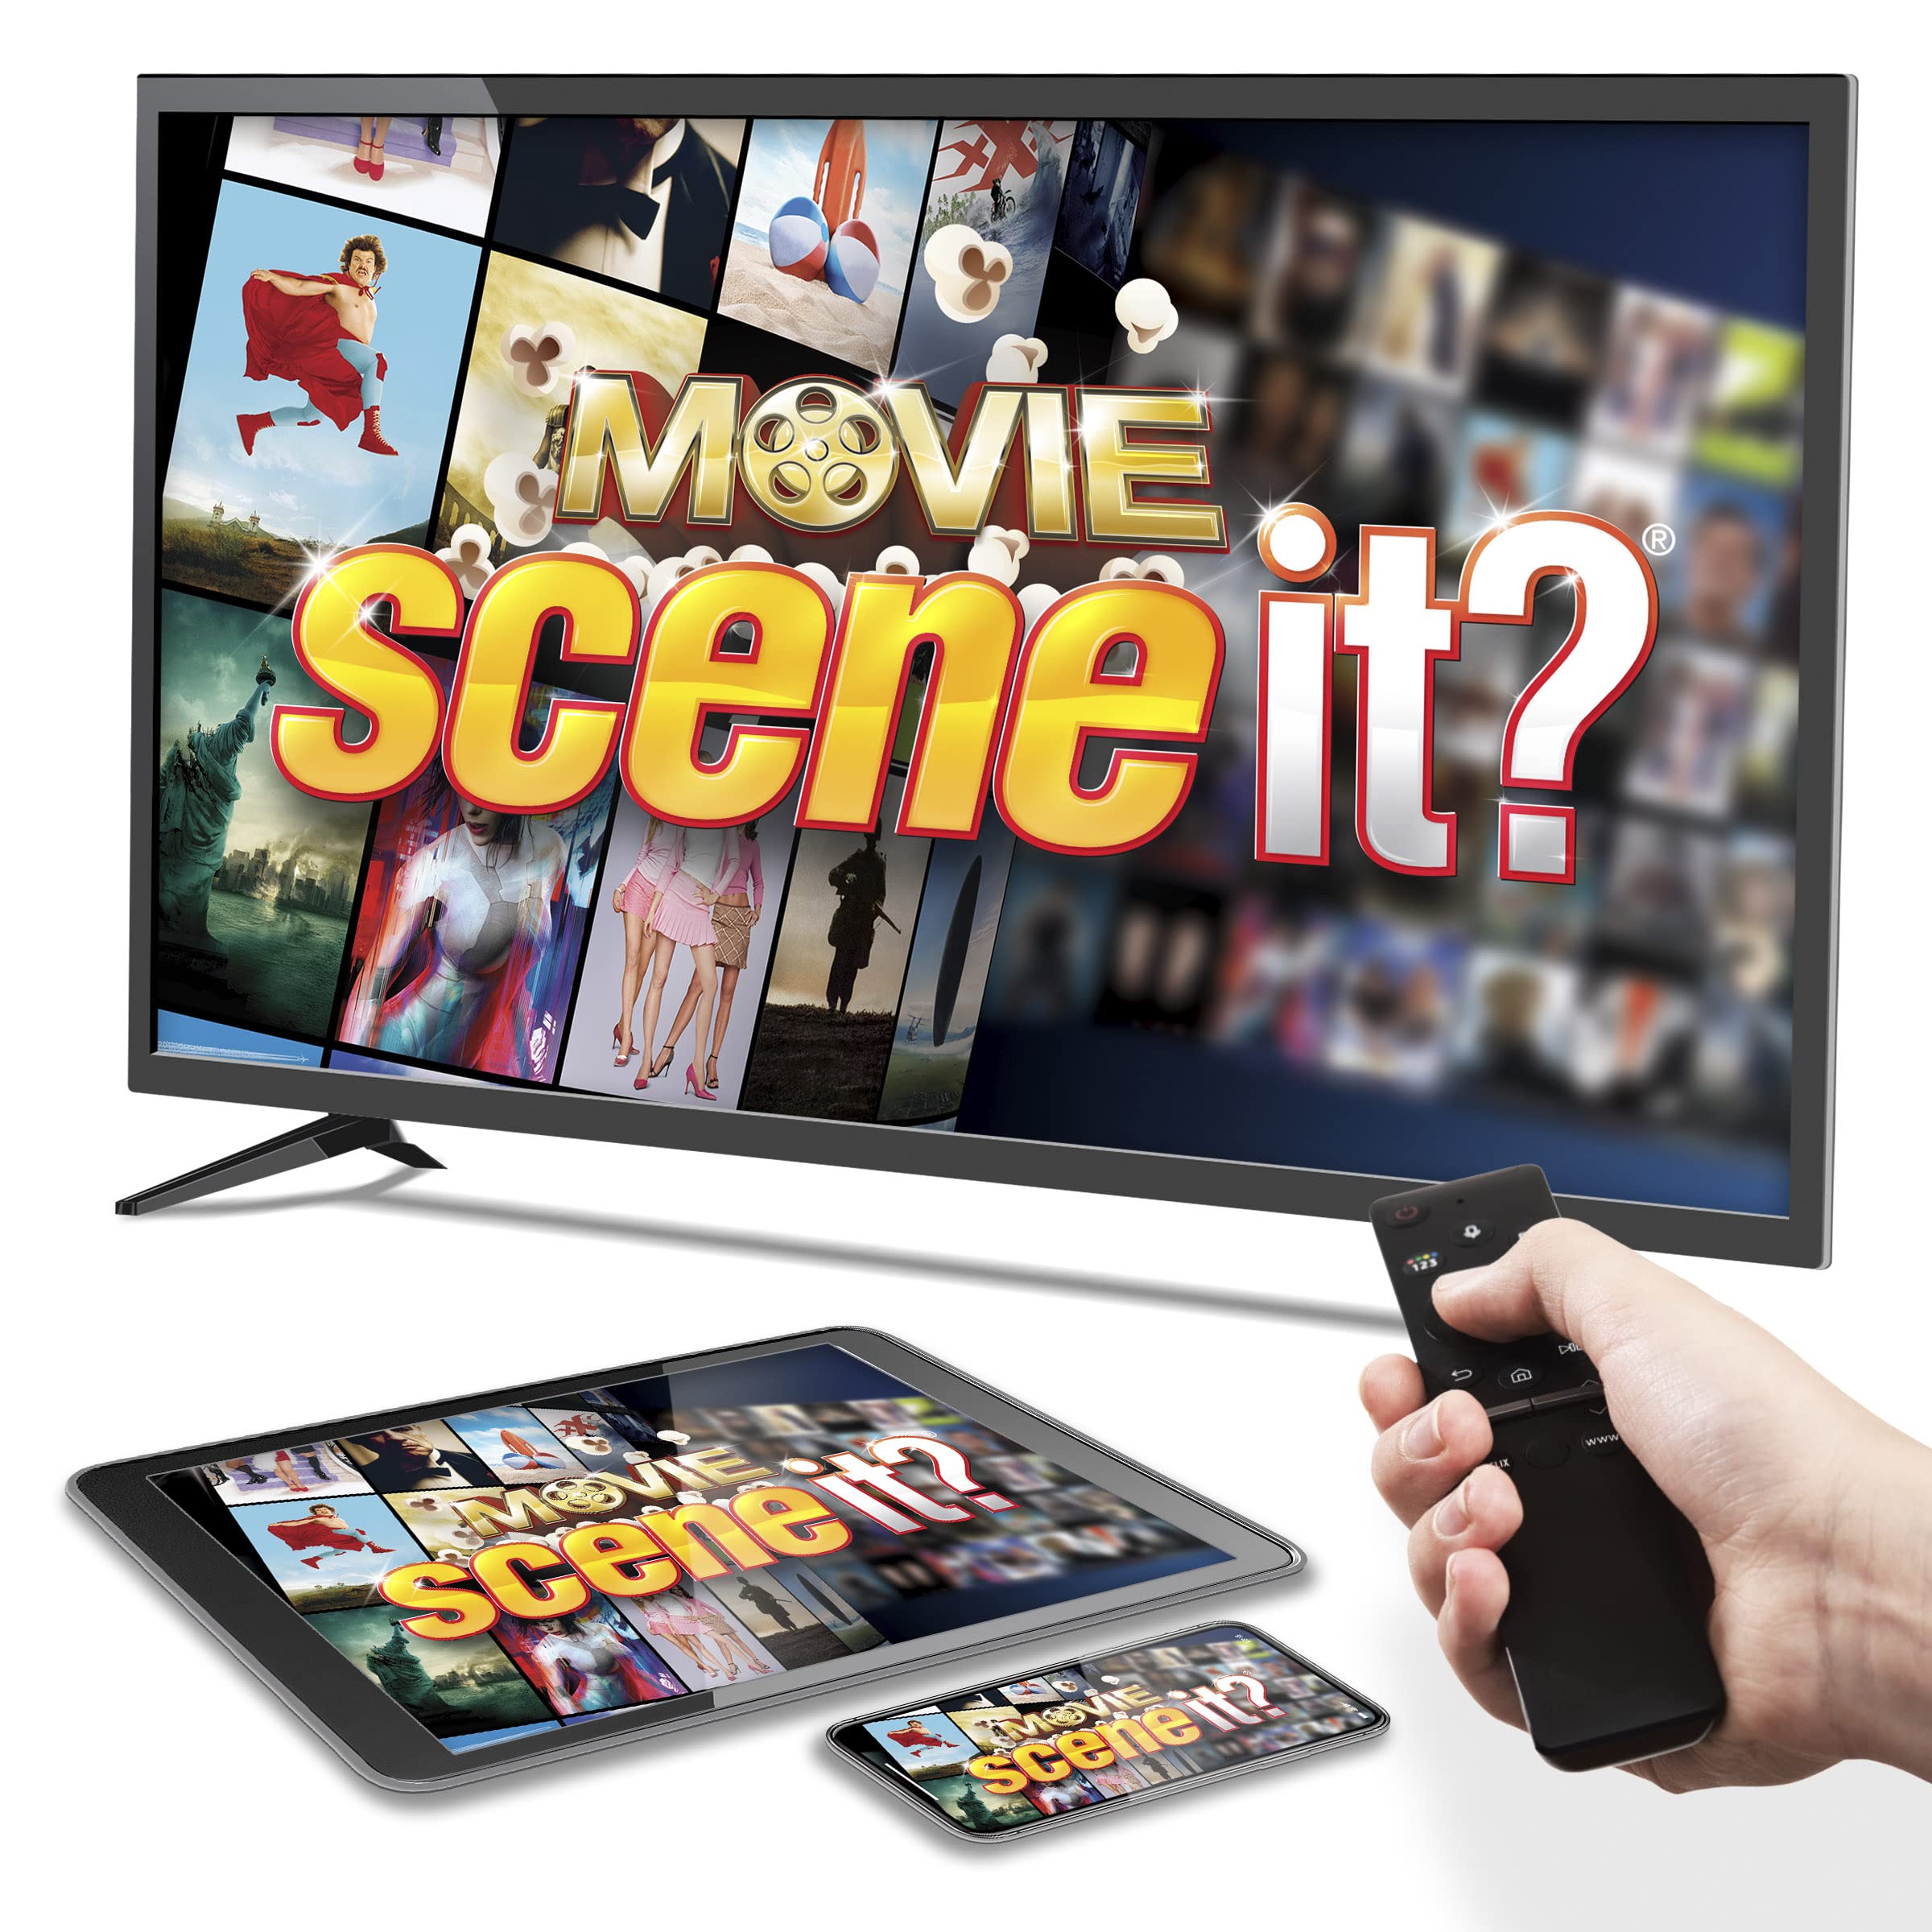 Scene It? Movie Trivia Board Game, The Ultimate Movie Knowledge Test, Puzzle-Solving Family Party Game, Stream Real Clips with Gamestar App+